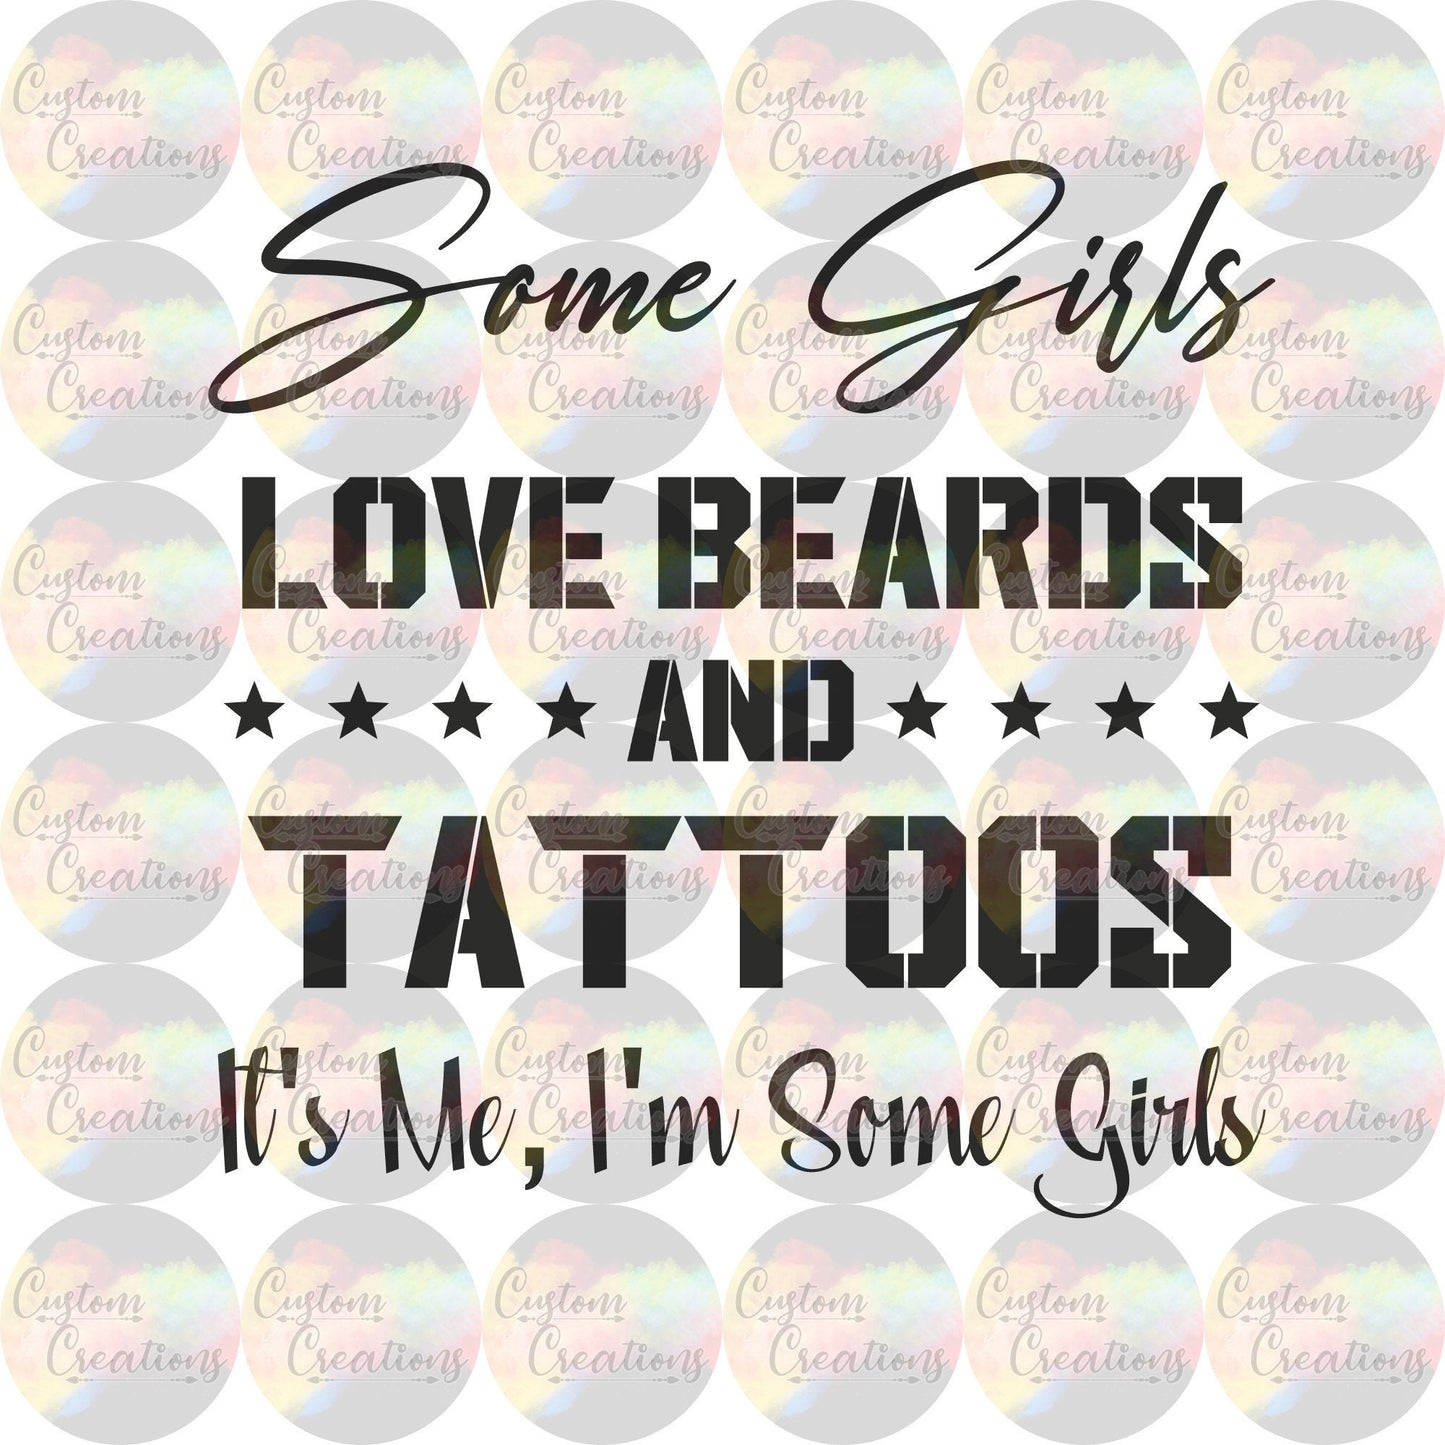 Some Girls Love Beards and Tattoos It's Me I'm Some Girls Digital Download File PNG, JPEG, & SVG